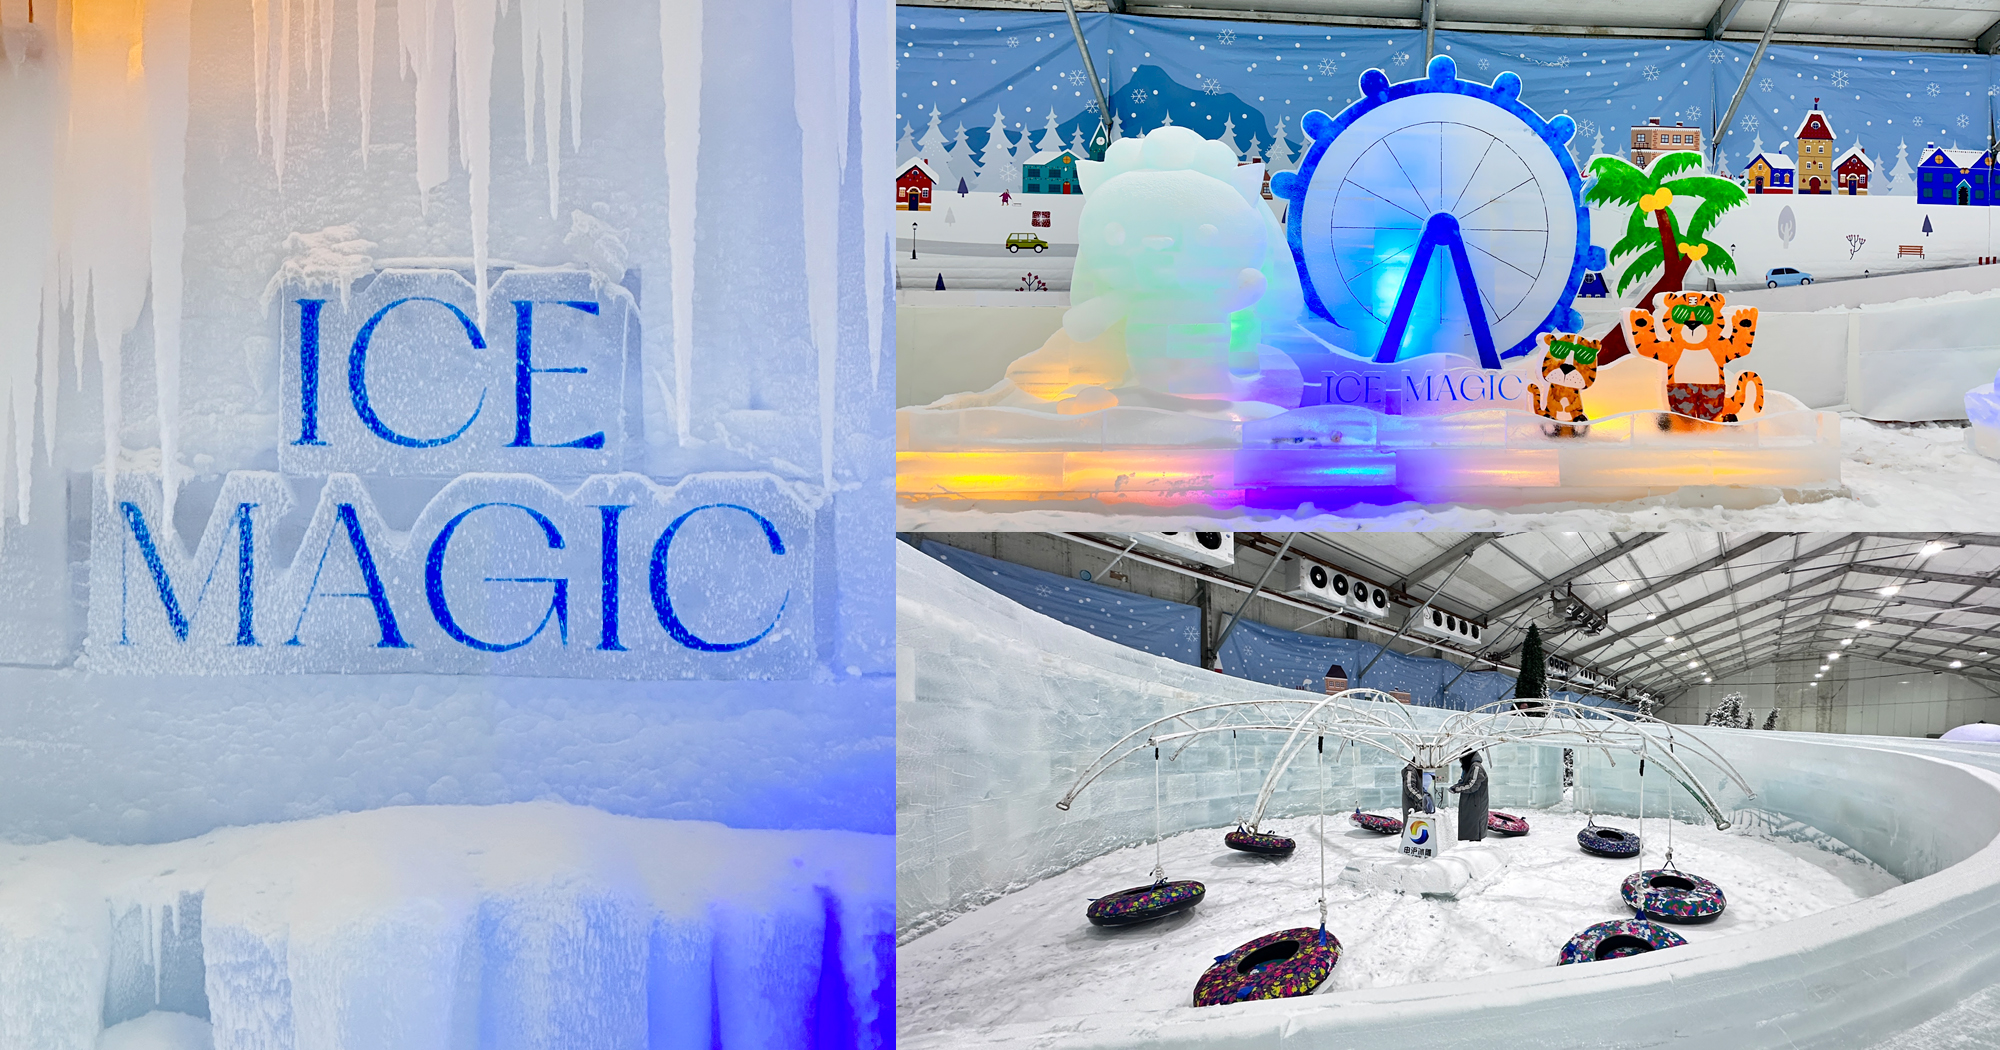 Ice Magic 2023 gets revamped entry system & larger space to avoid repeat of 2022's long wait times